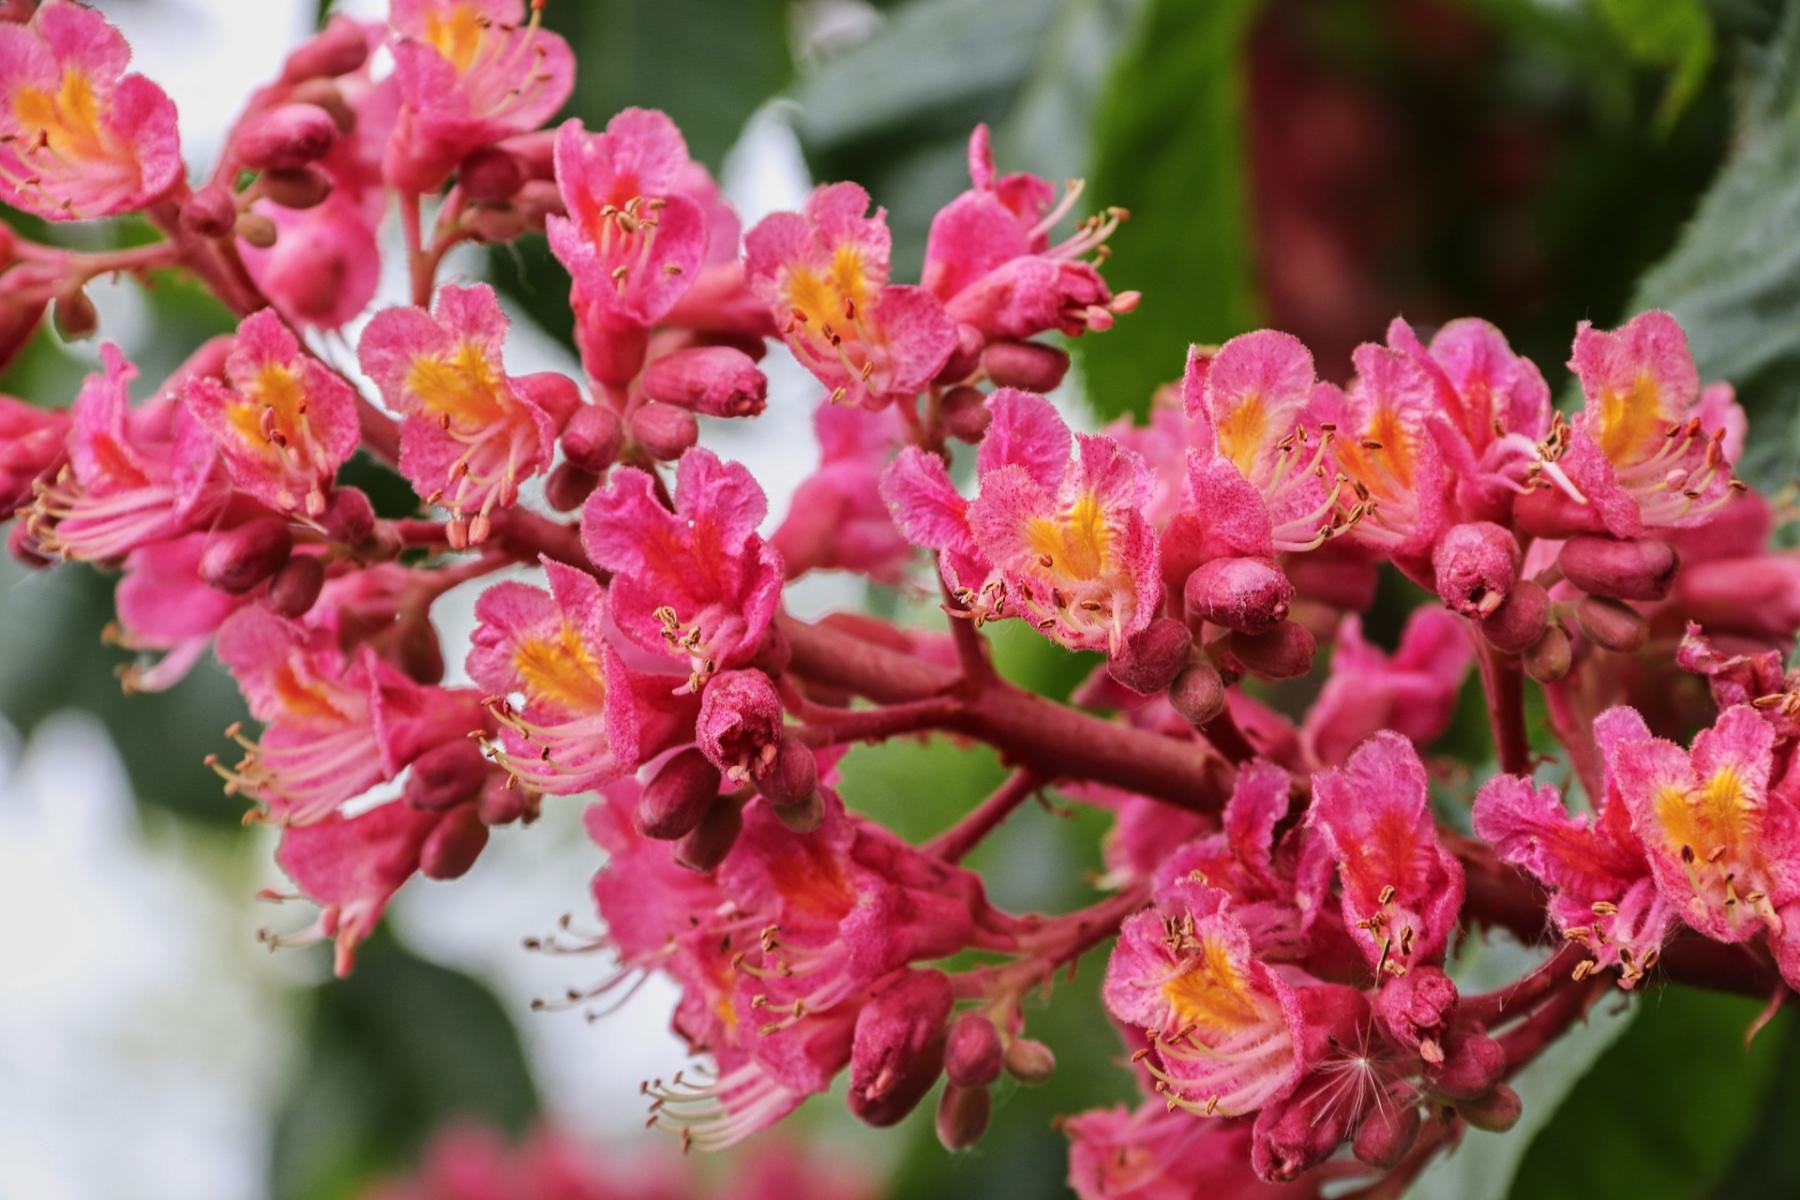 Image of red horse chestnut flowers. 